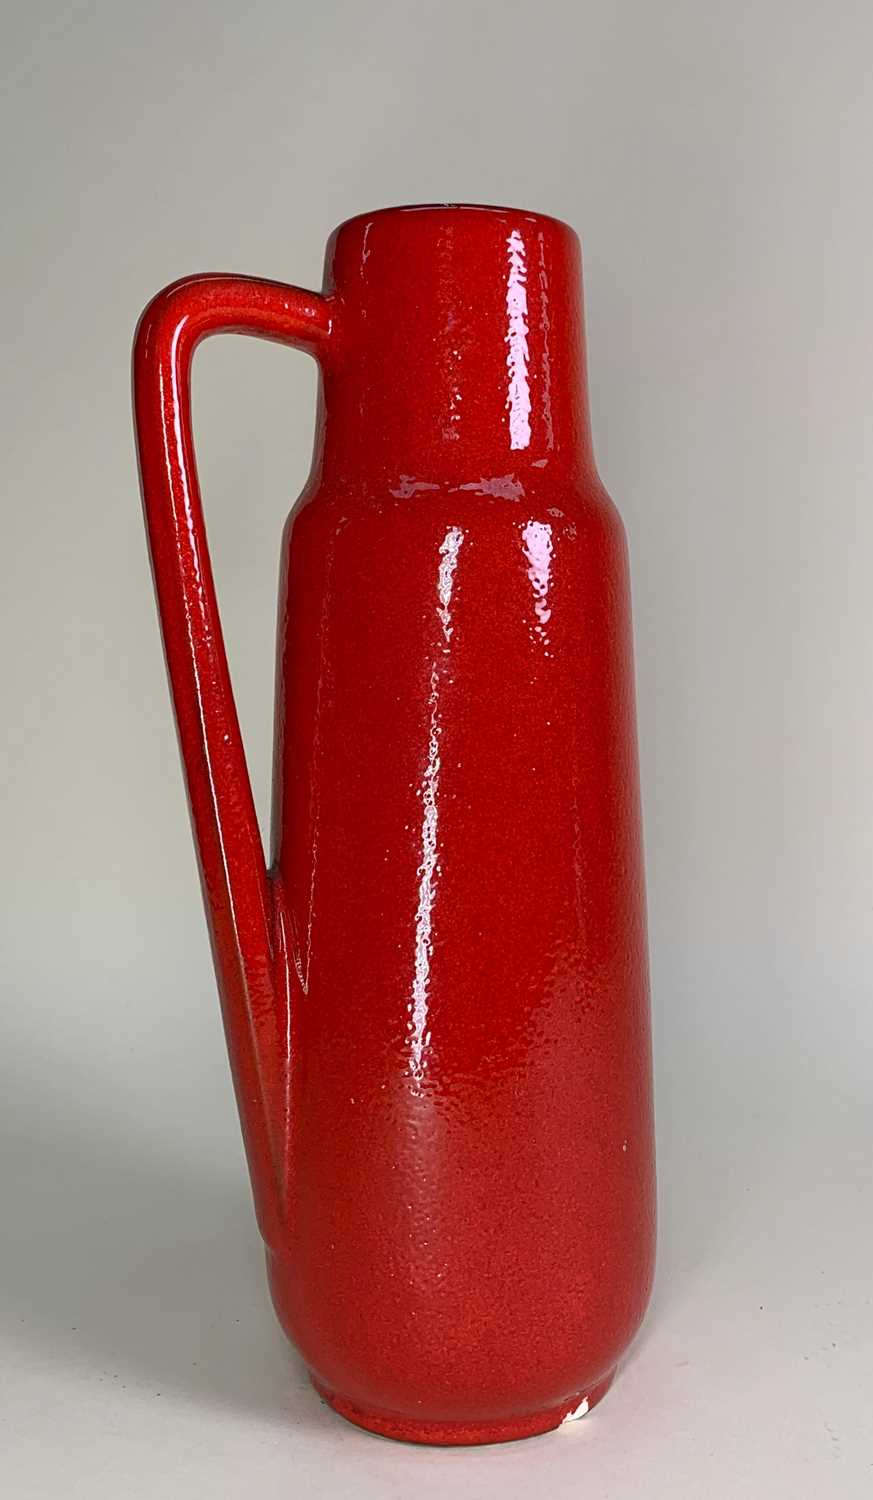 MID CENTURY POTTERY WGP KERAMICS COLLECTION including one Scheurich 275-28 solid red glazed vase - Image 11 of 20